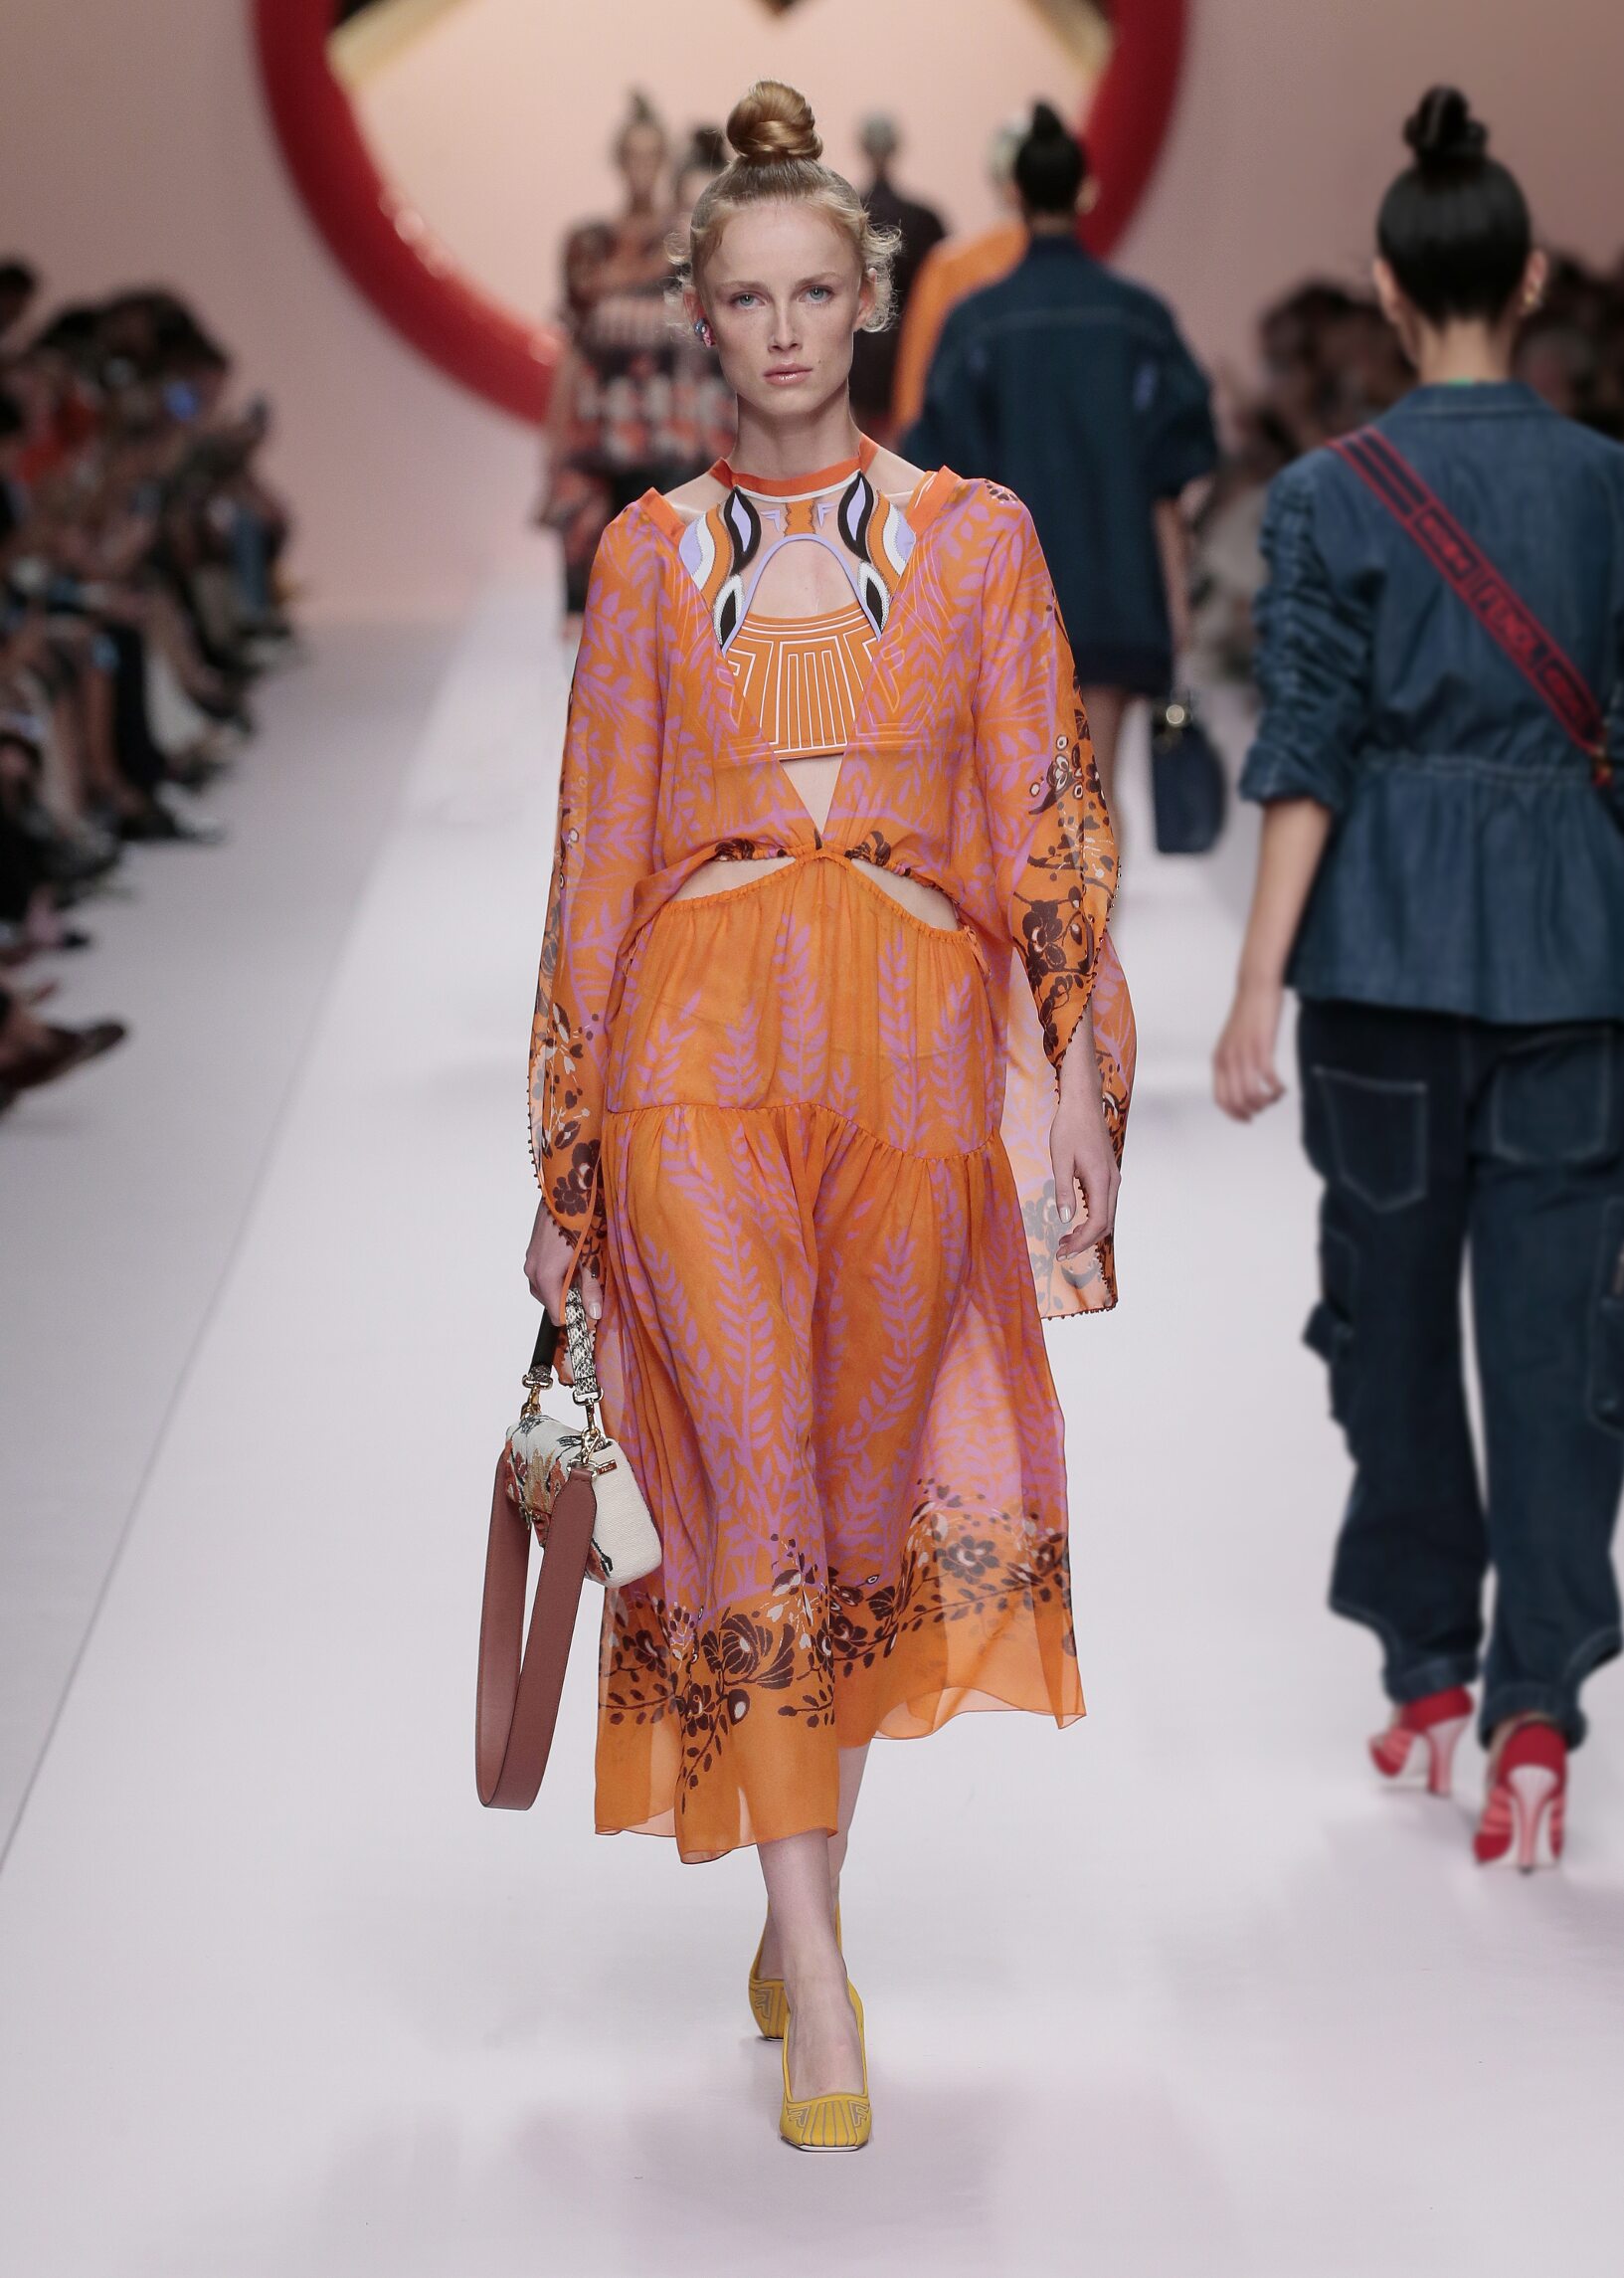 FENDI SPRING SUMMER 2019 WOMEN’S COLLECTION | The Skinny Beep